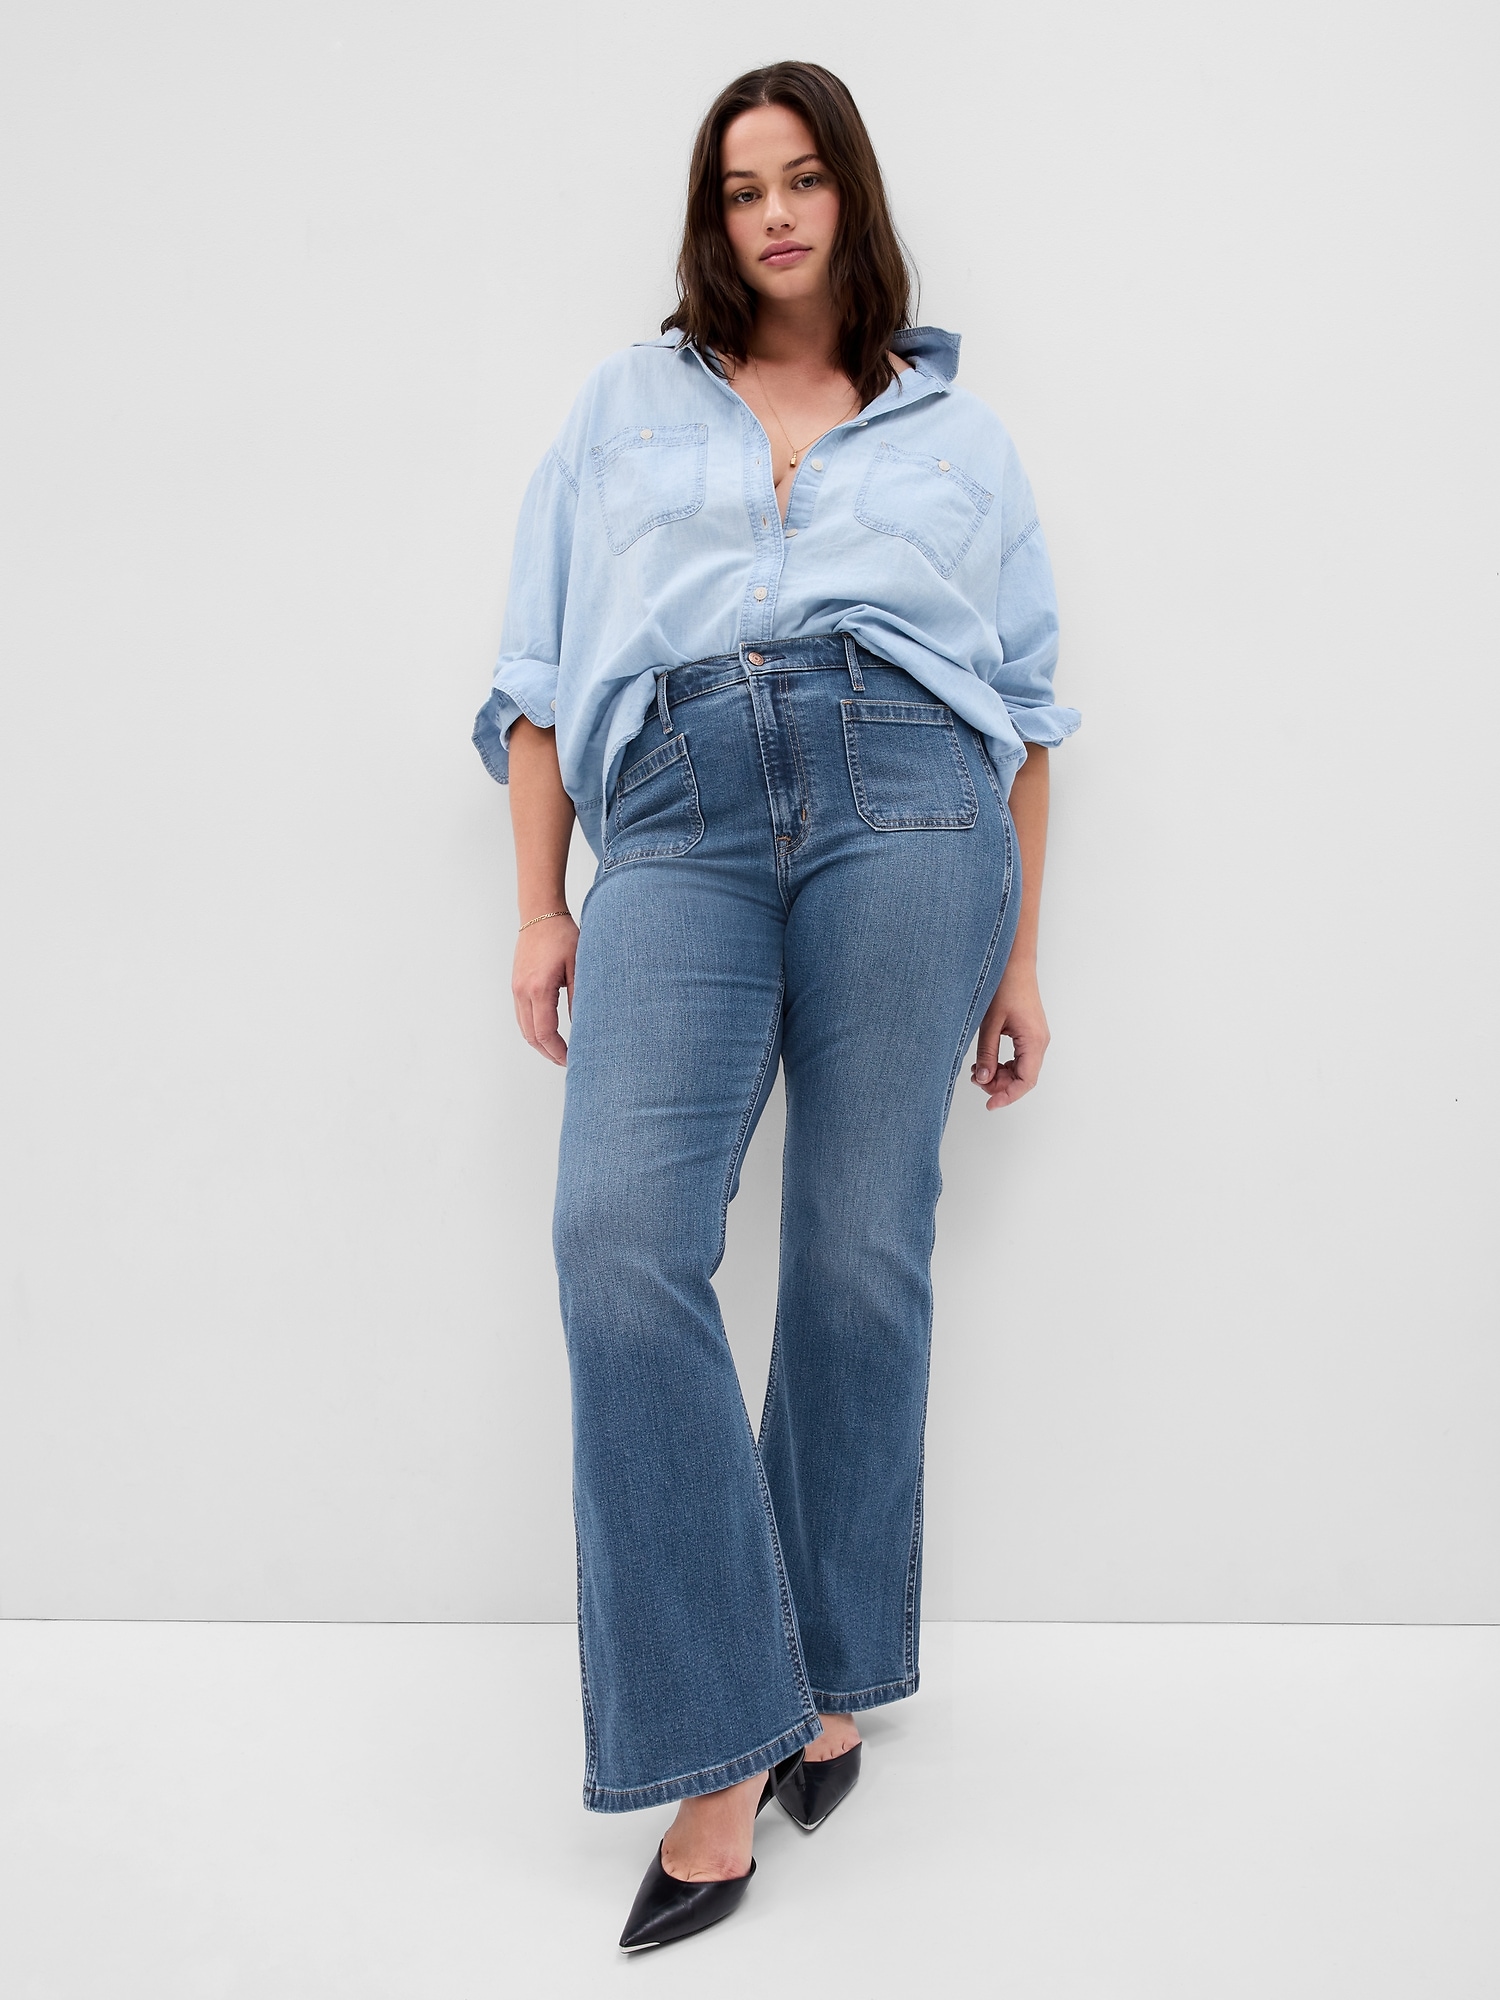 Gap 1981 flare jeans